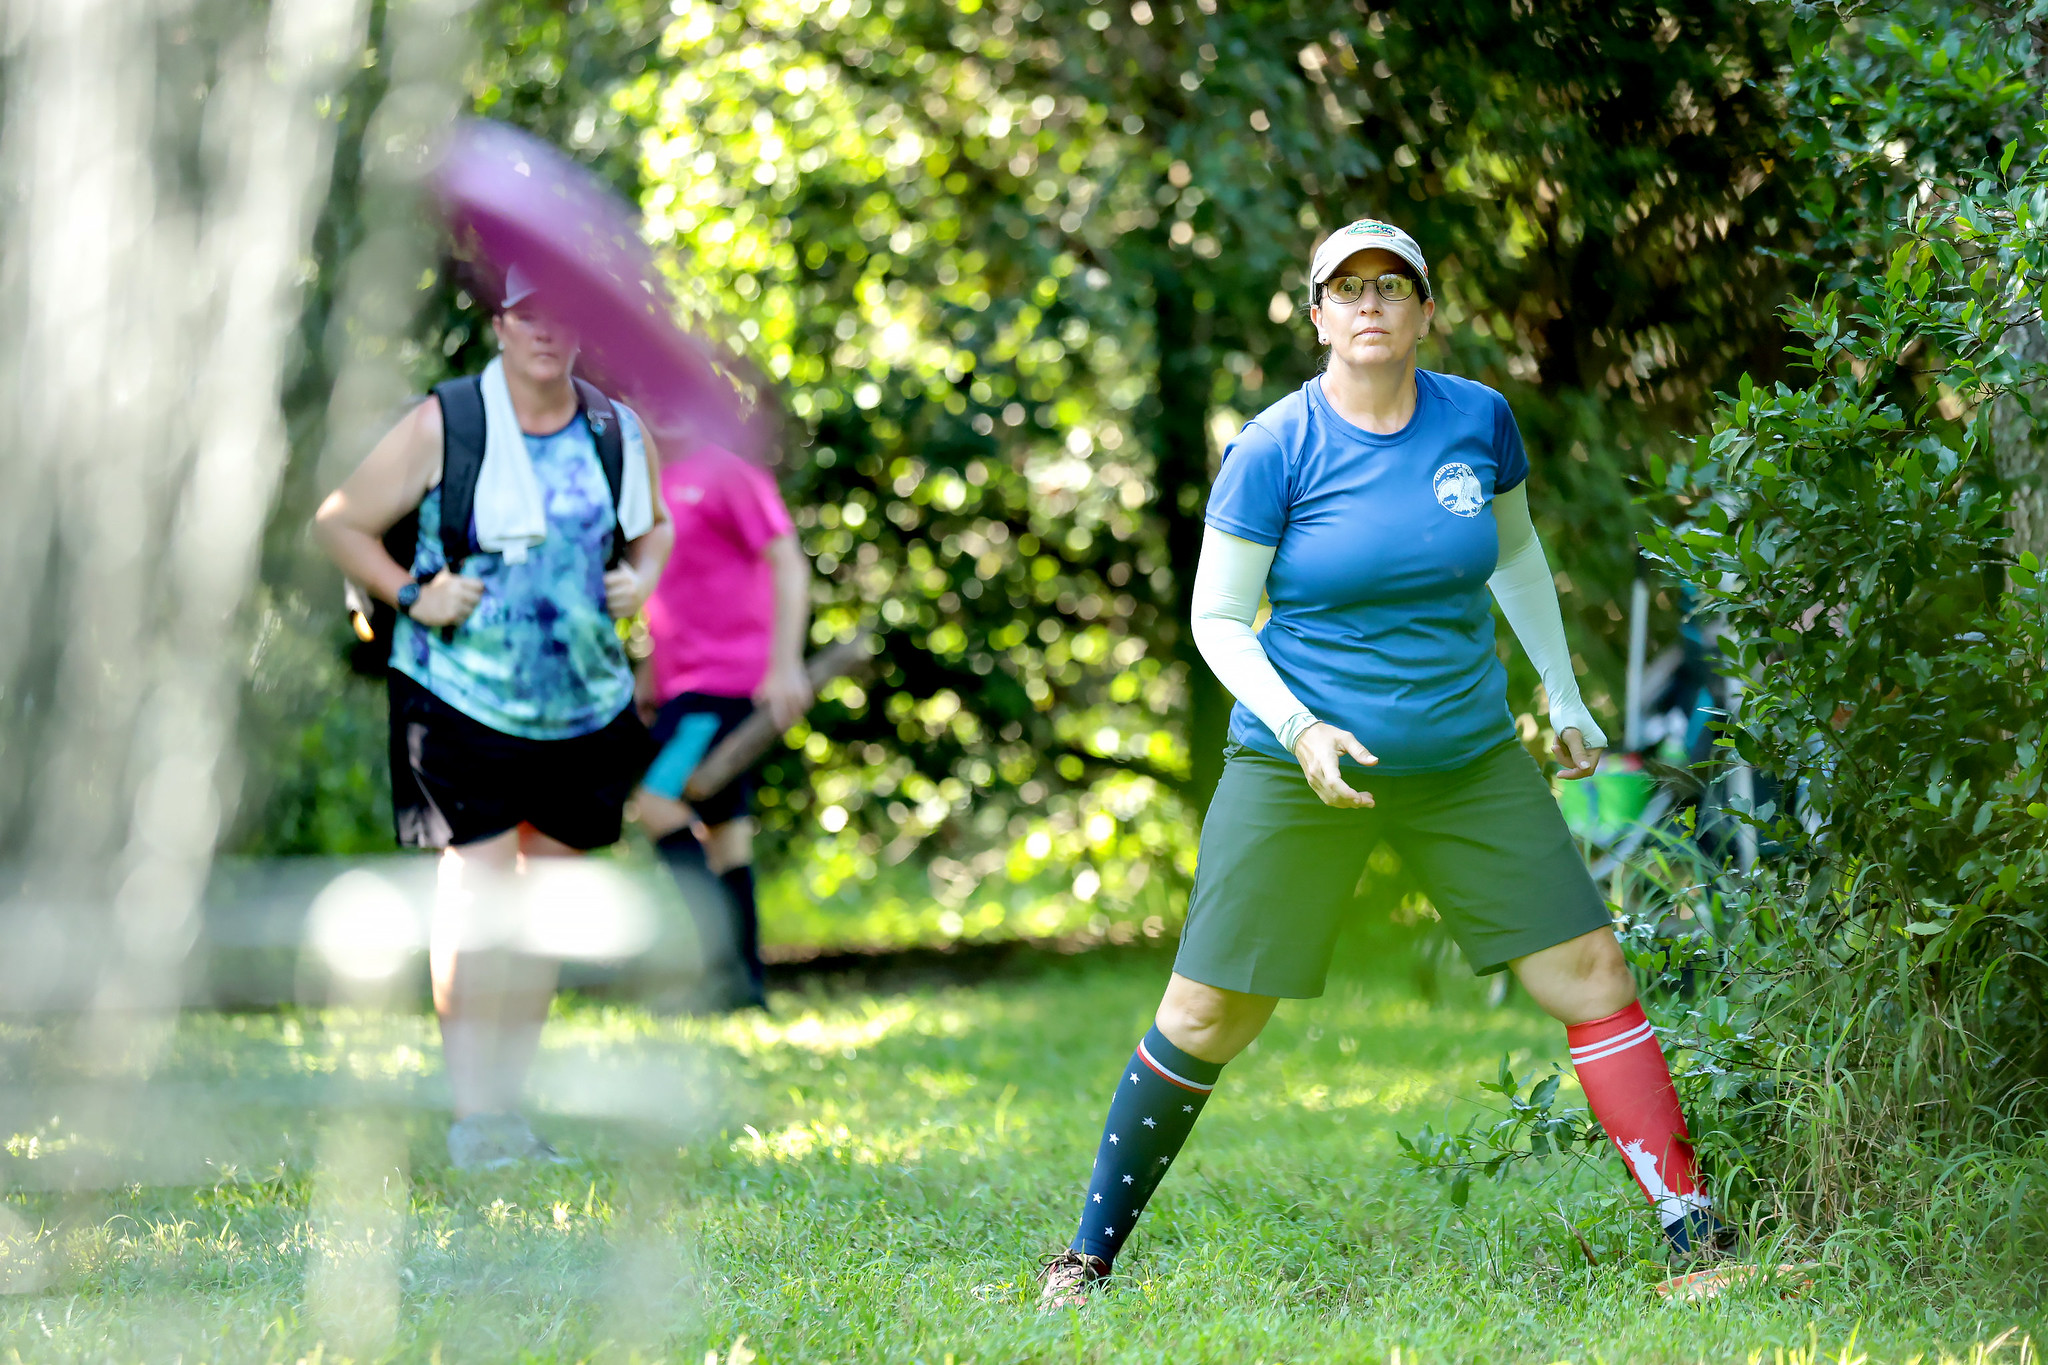 How to Qualify PDGA Am Masters Worlds Invite Professional Disc Golf